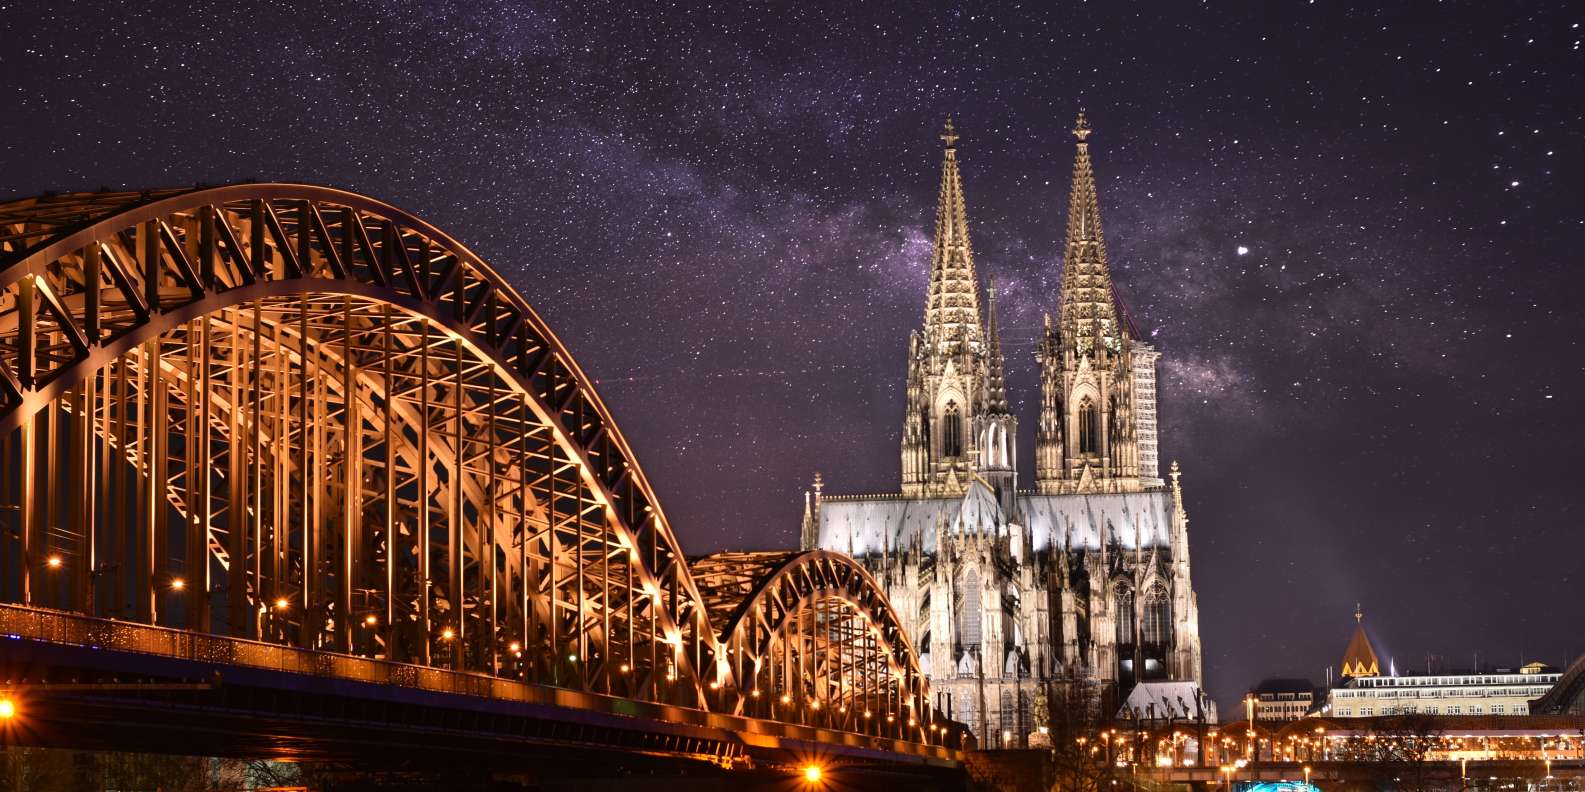 things to do in Cologne